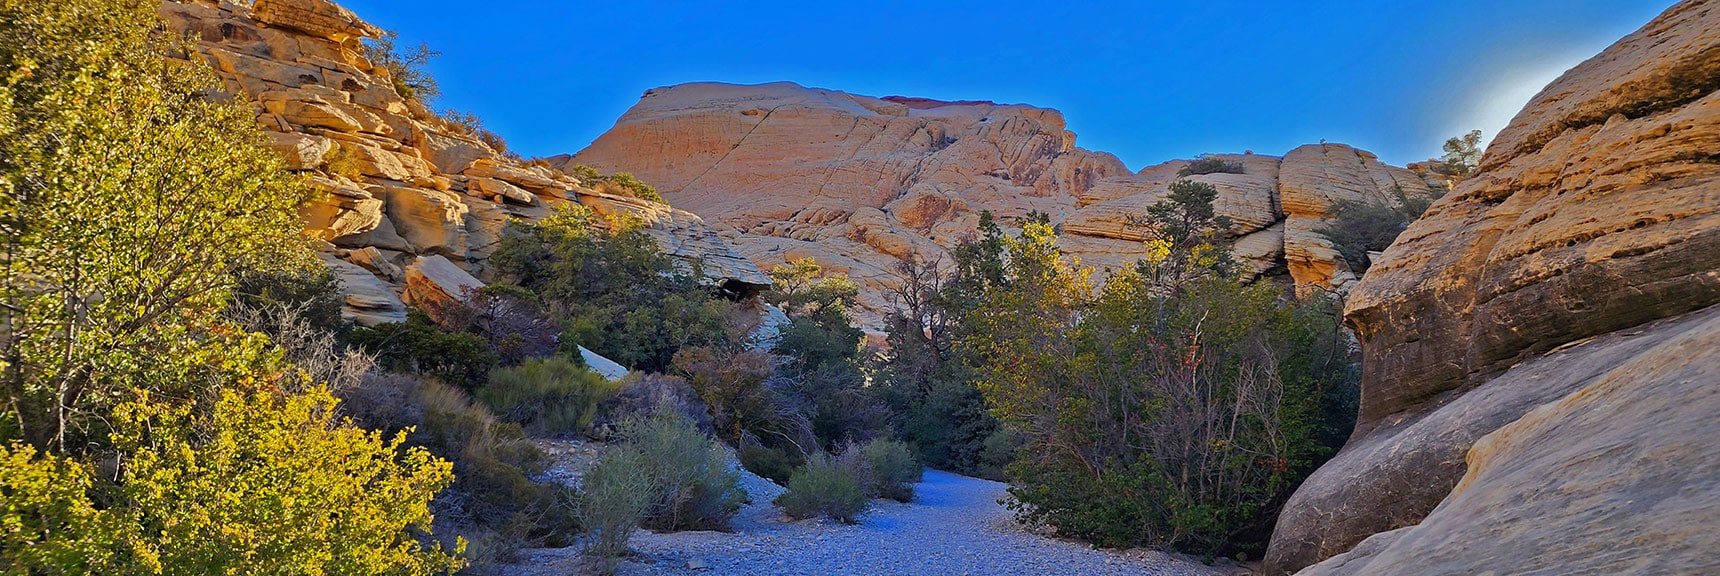 As the Sun is Rising Ahead, Most Pictures Will Be Taken Looking Backwards! | Calico Tanks | Red Rock Canyon National Conservation Area, Nevada